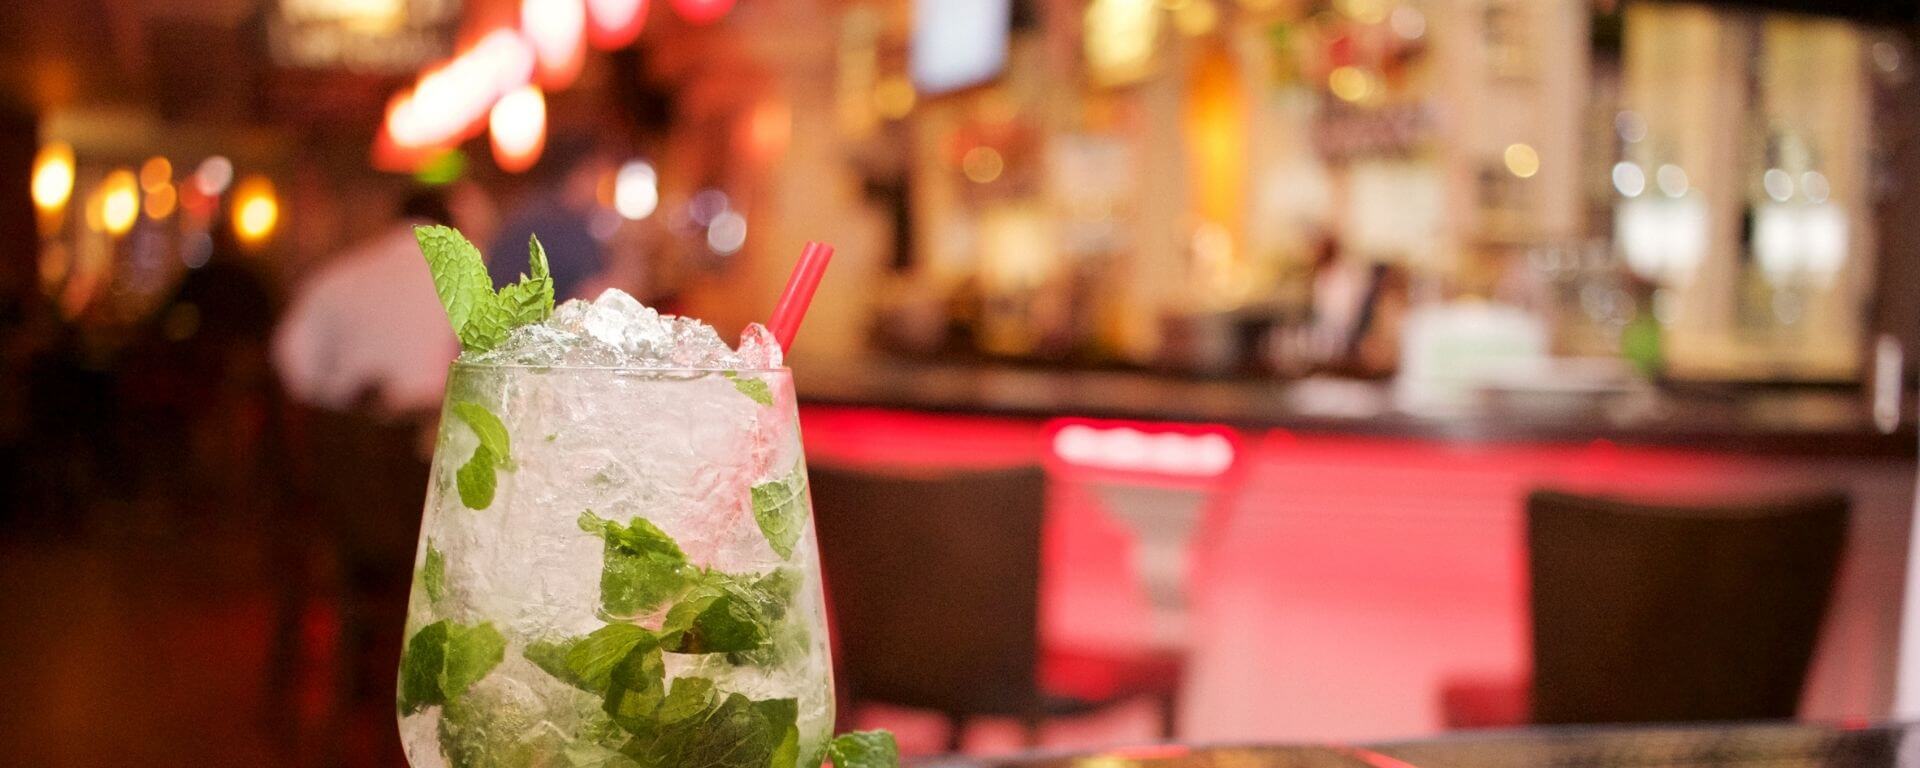 Icy drink with mint leaves on a table with a bar in the background.